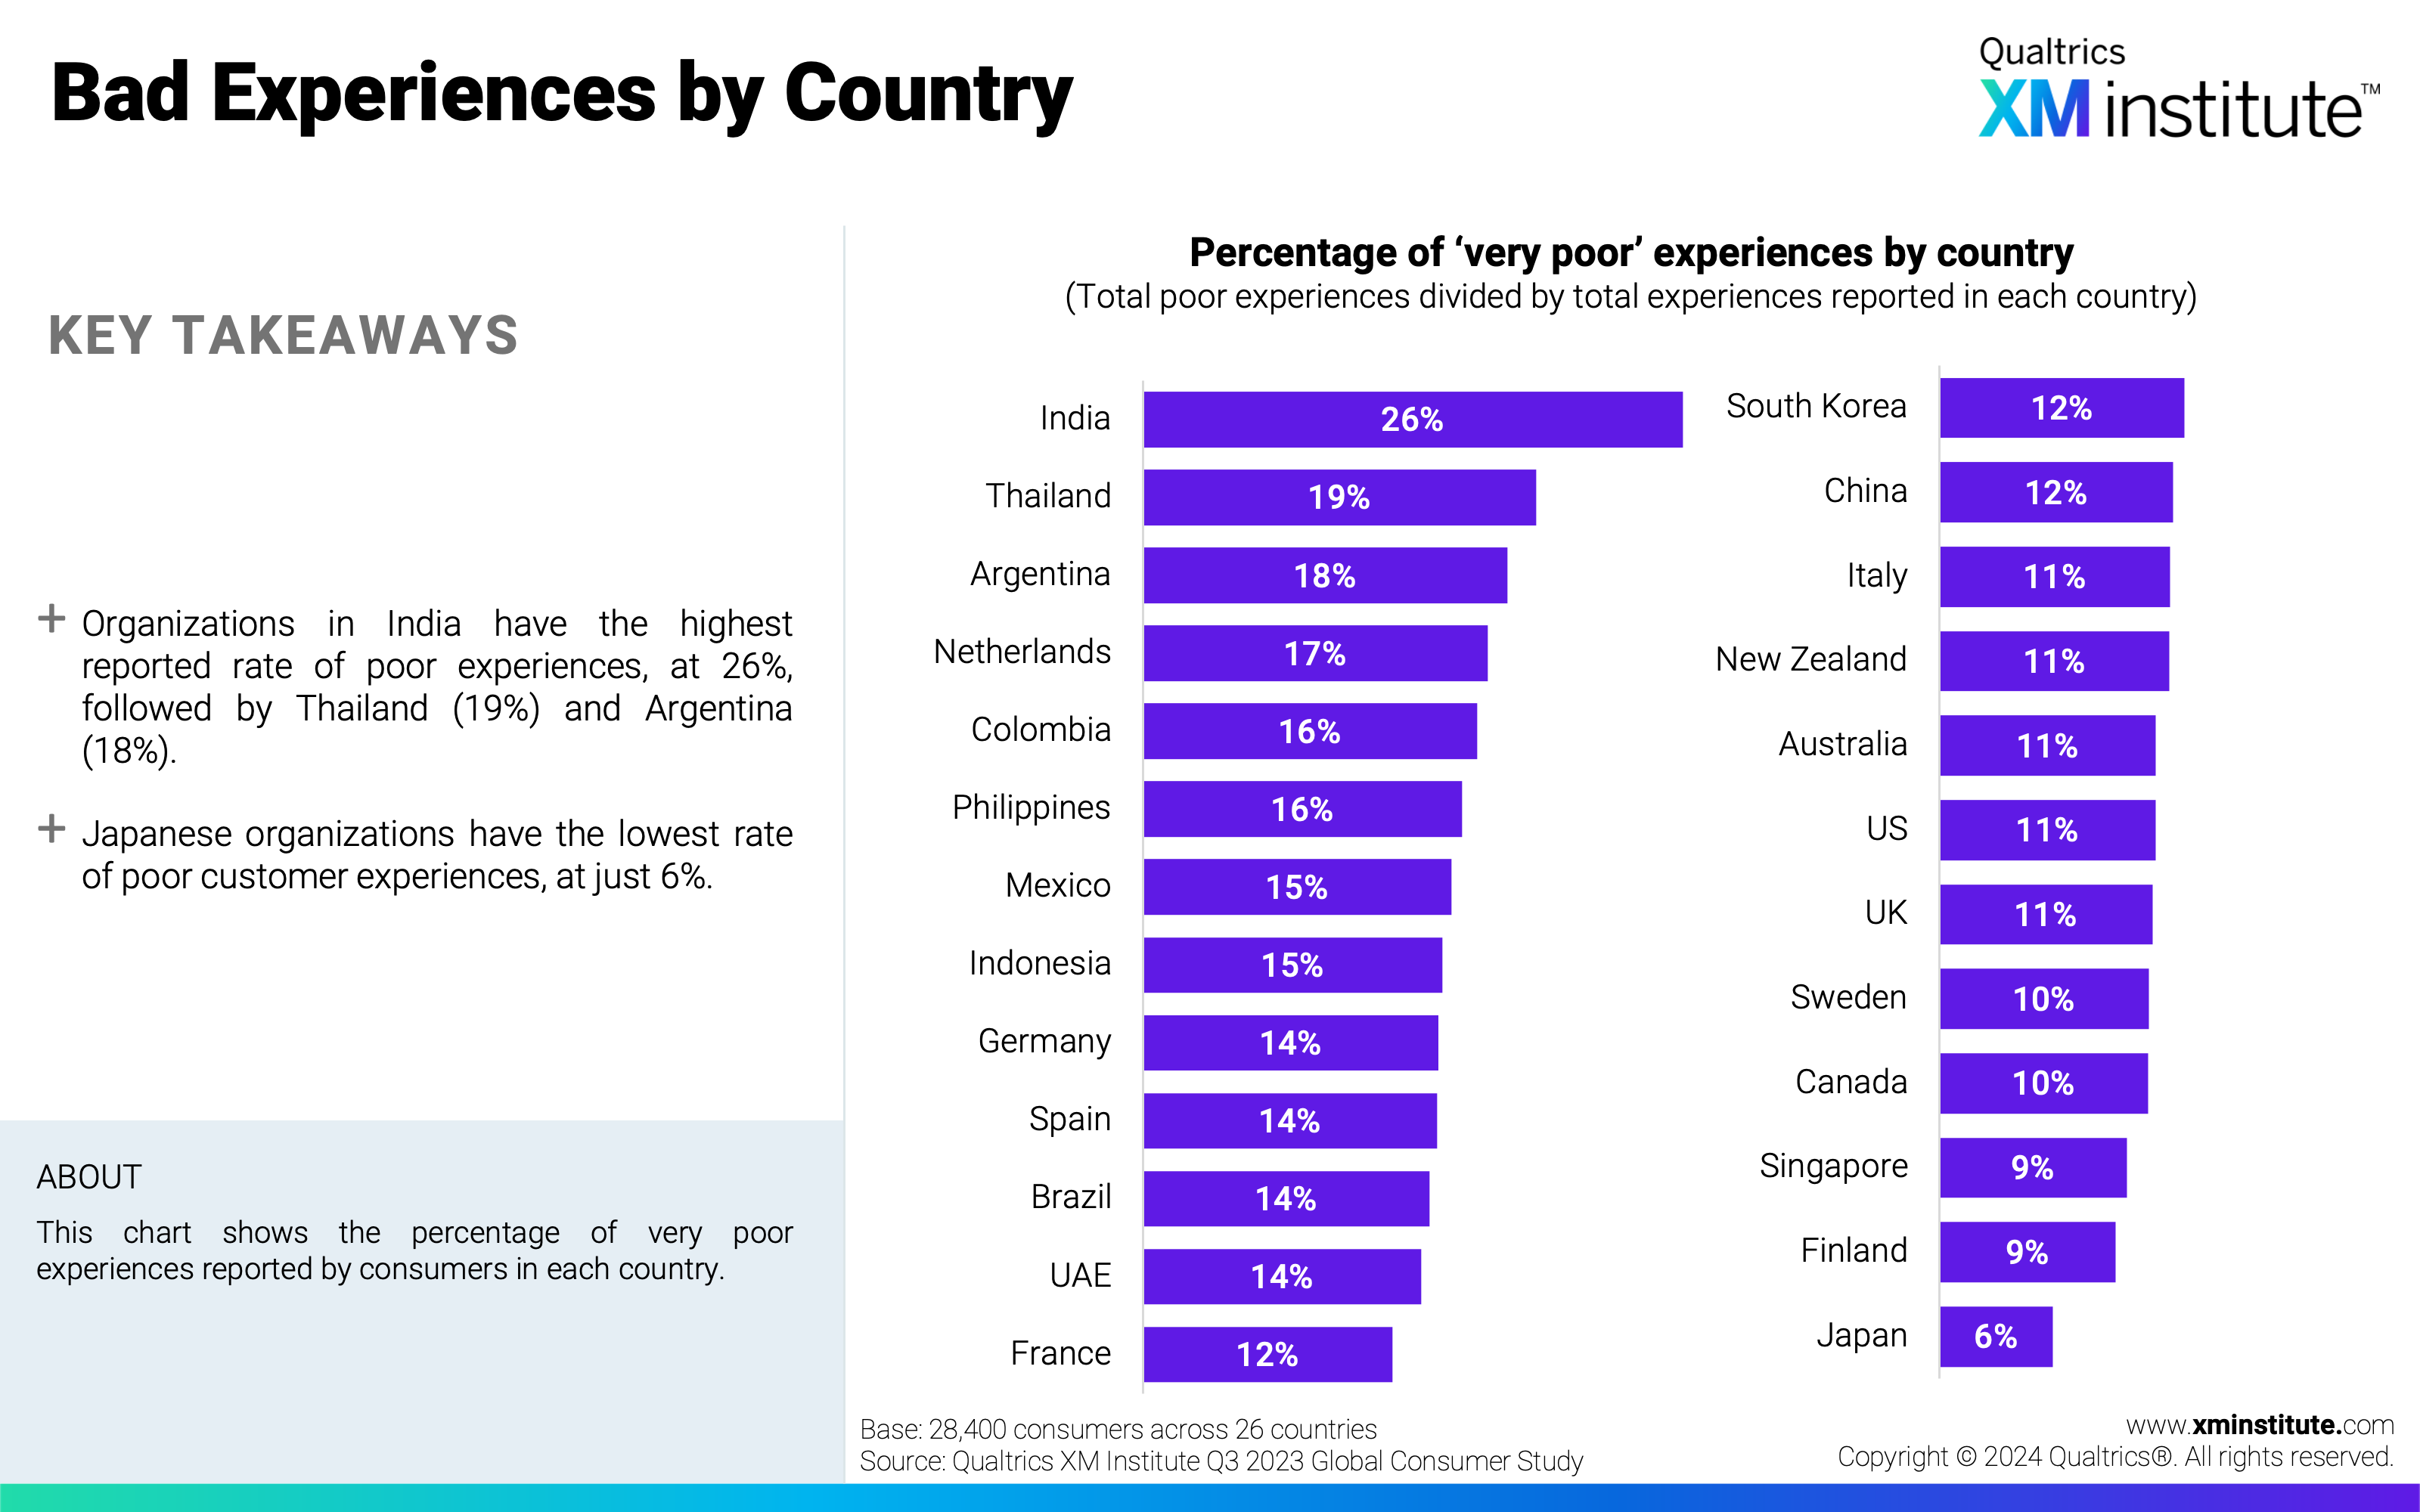 This chart shows the percentage of very poor experiences reported by consumers in each country. 